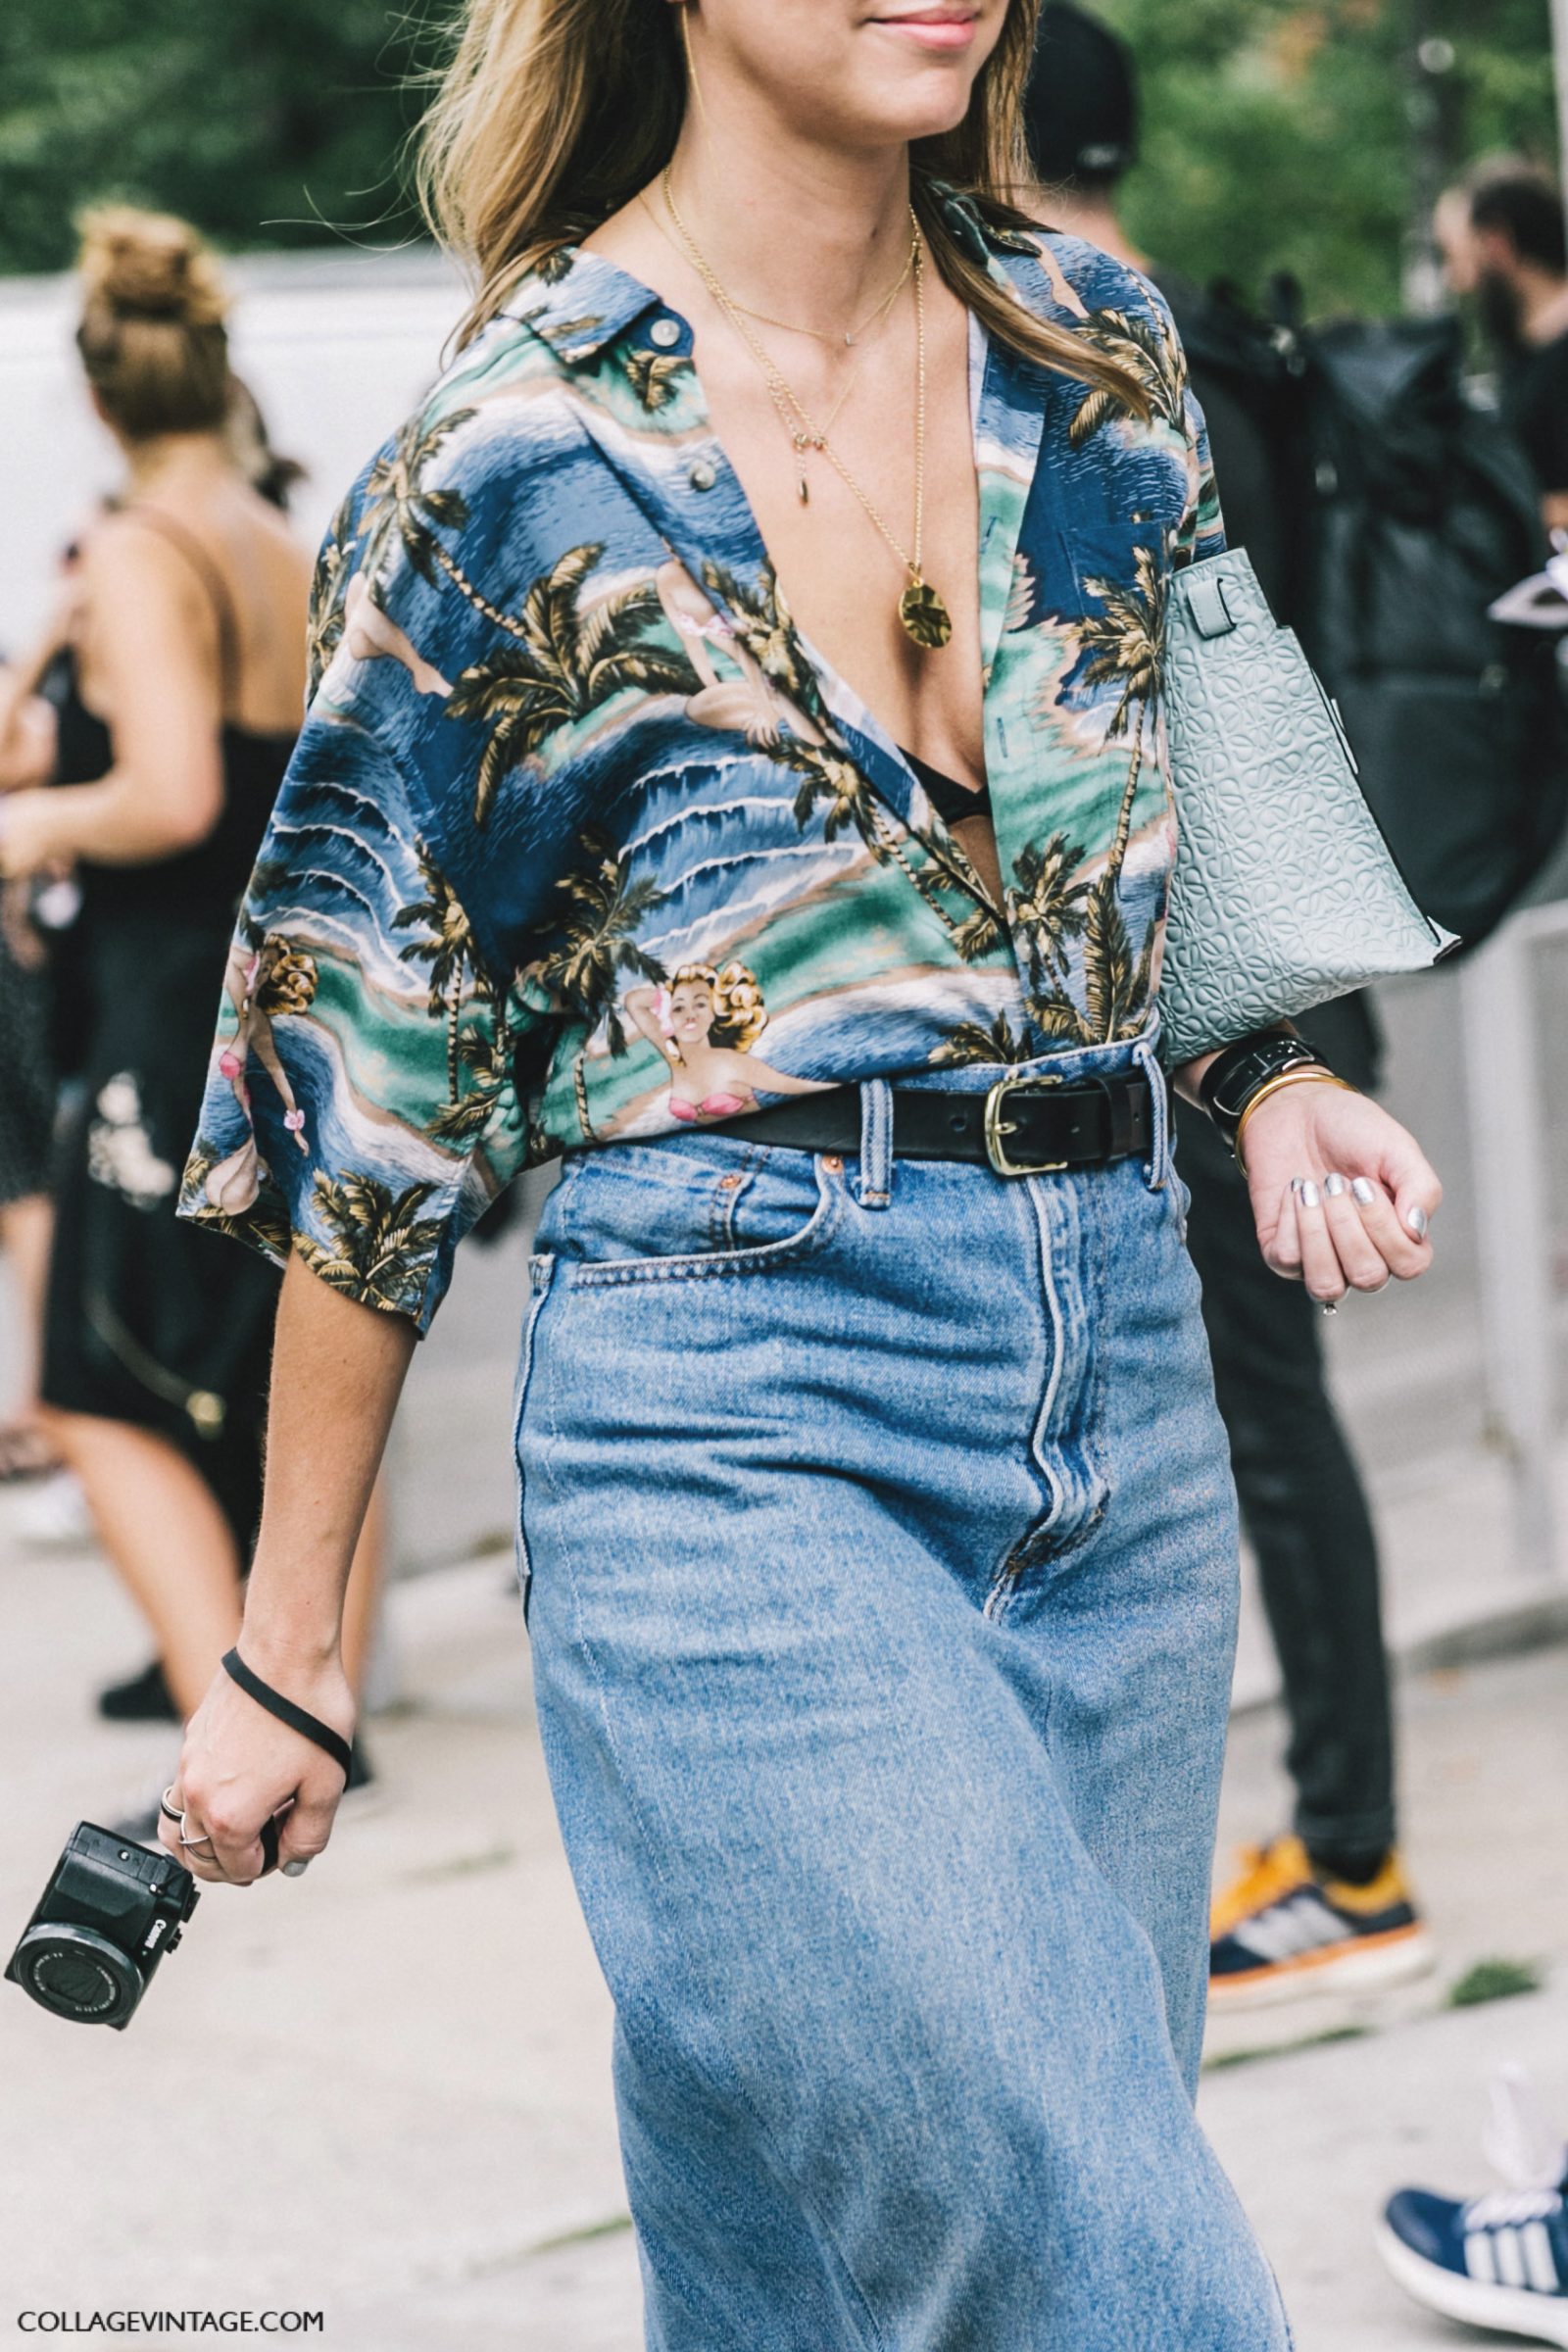 nyfw-new_york_fashion_week_ss17-street_style-outfits-collage_vintage-denim_skirt-tropical_shirt-1